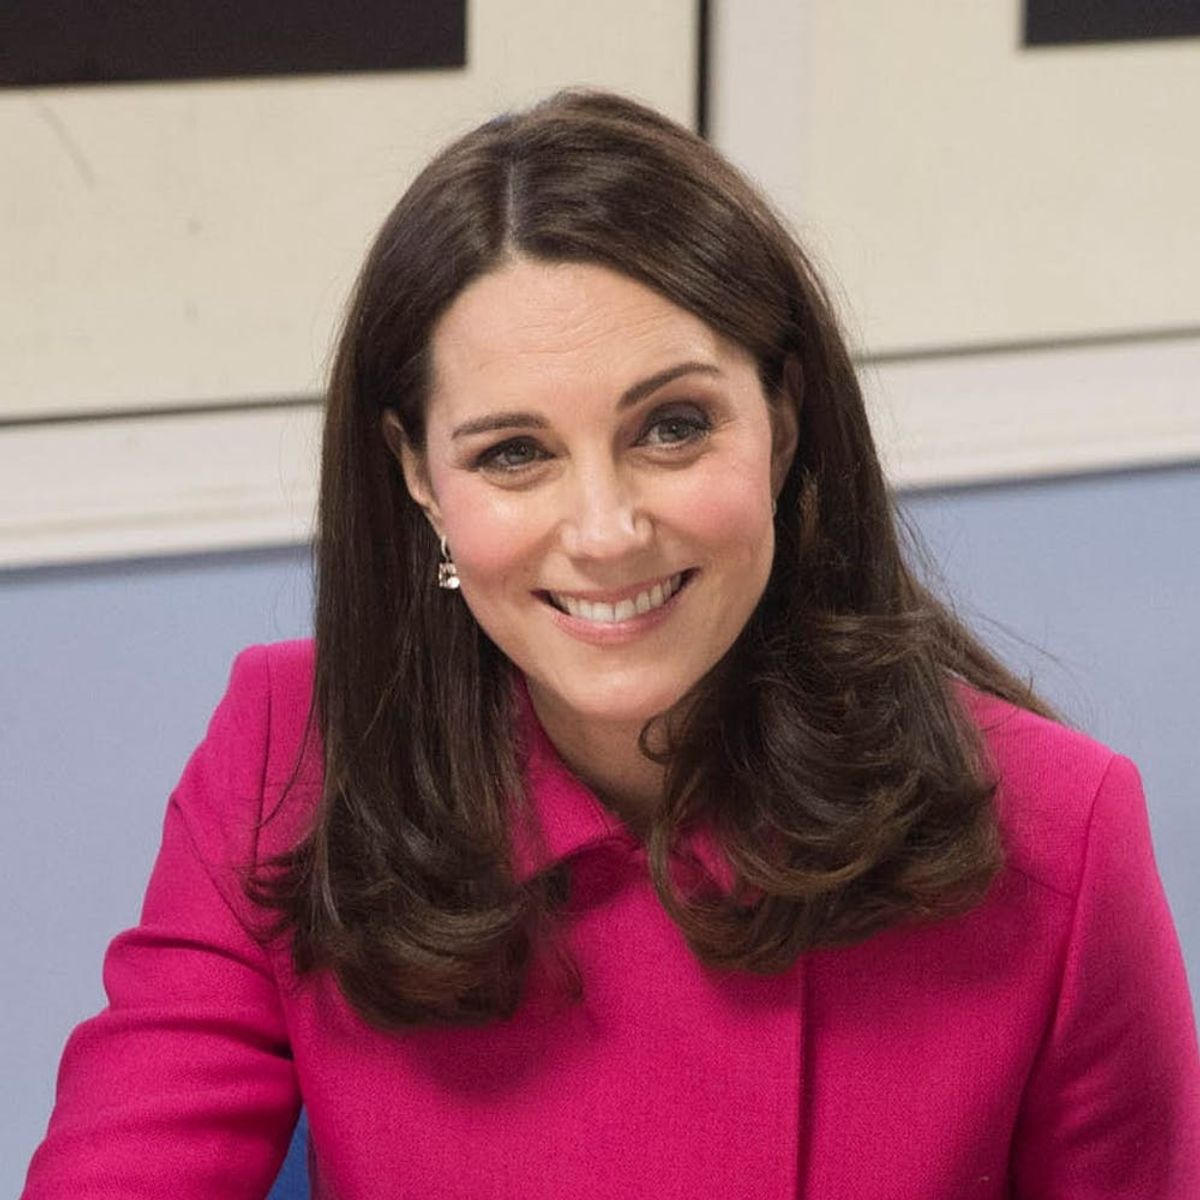 Here’s Why Fans Are Freaking Out Over Kate Middleton’s Recycled Pregnancy Coat